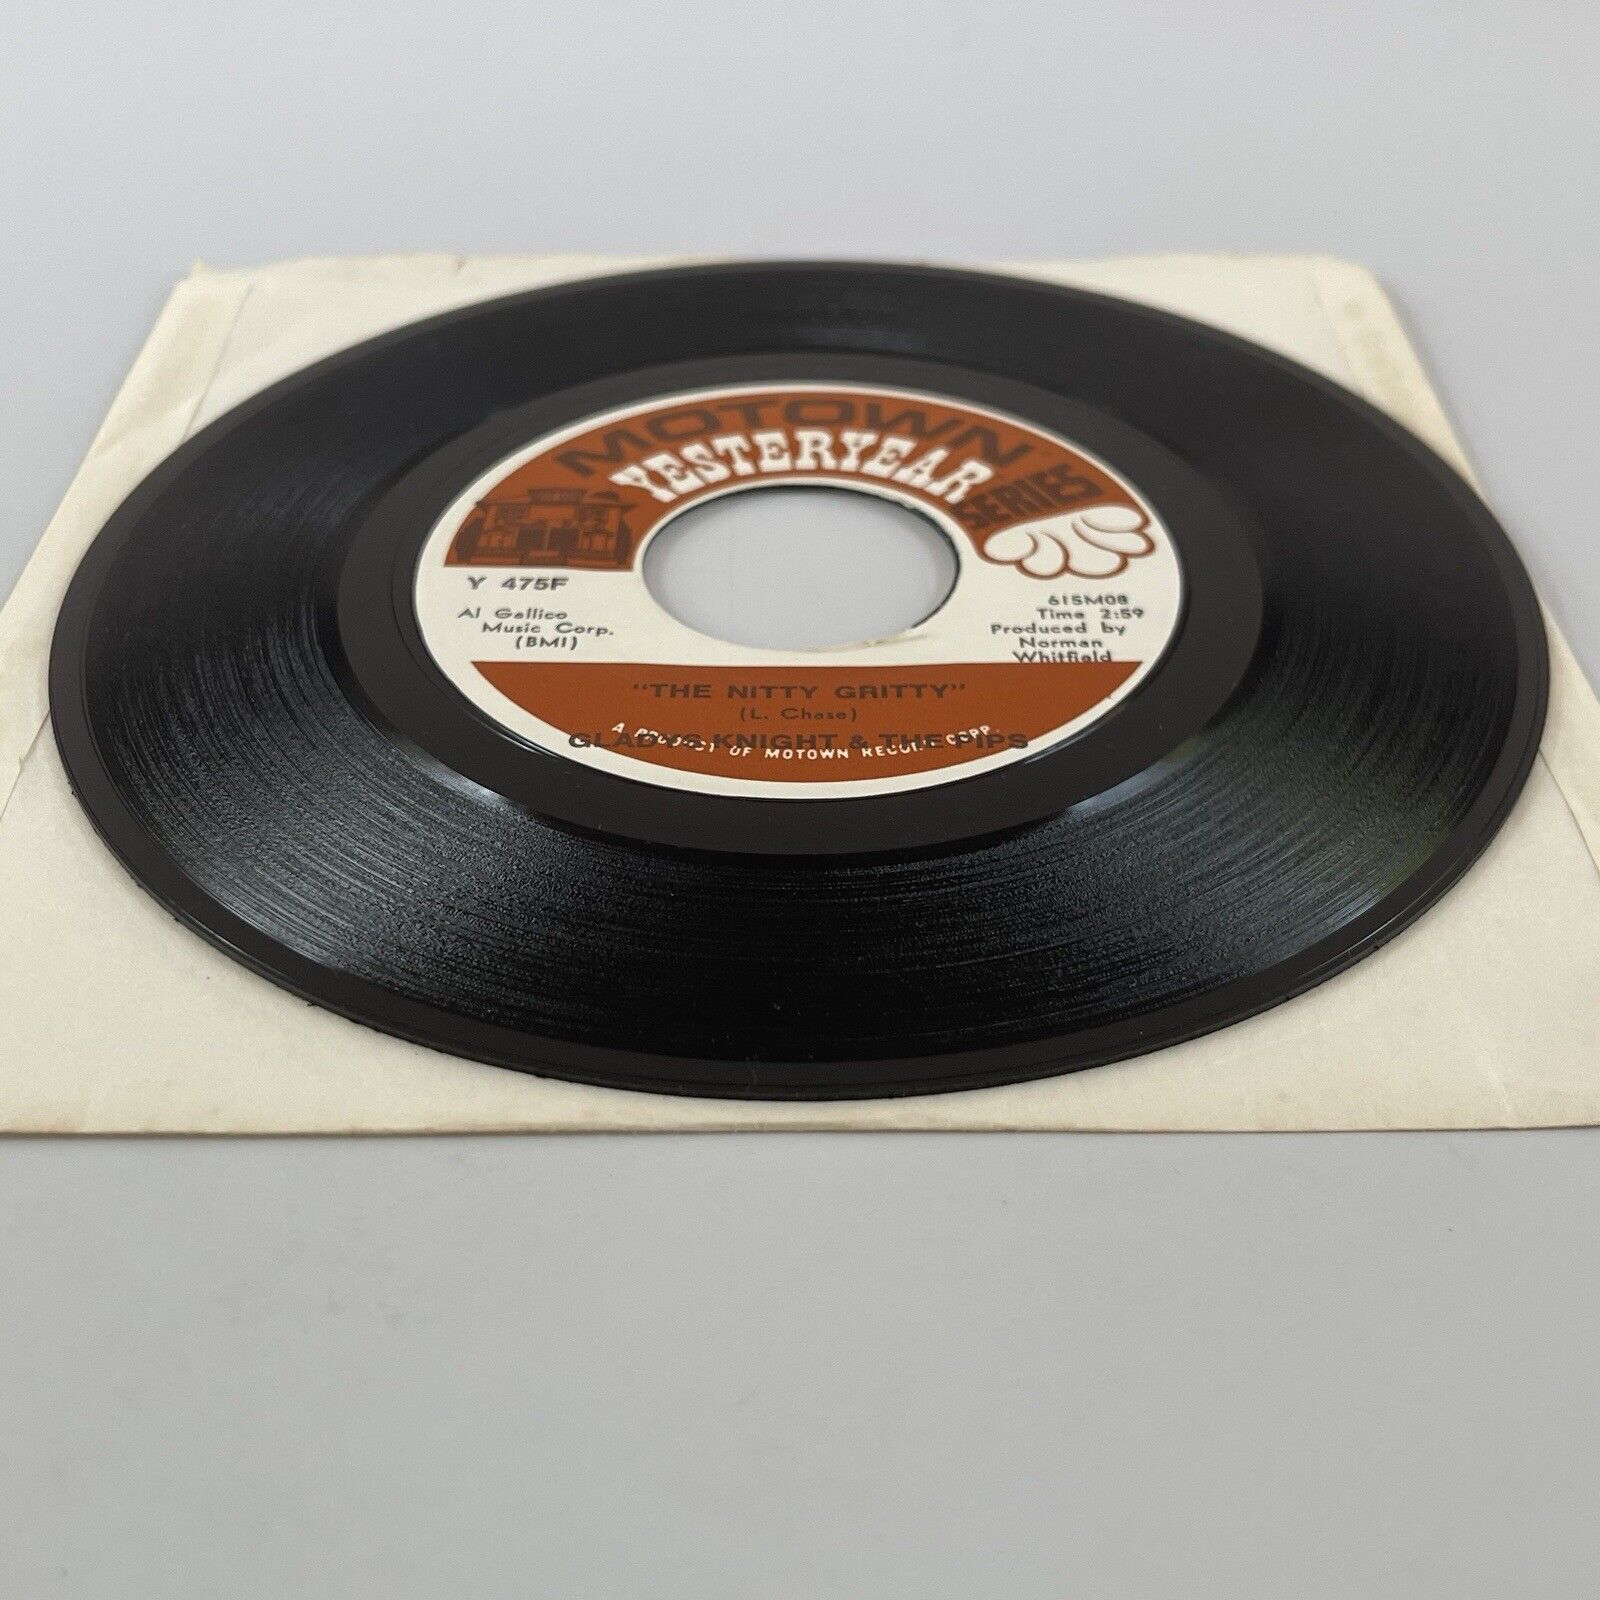 Gladys Knight & The Pips - Didn’t You Know / The Nitty Gritty 7" 45 EX